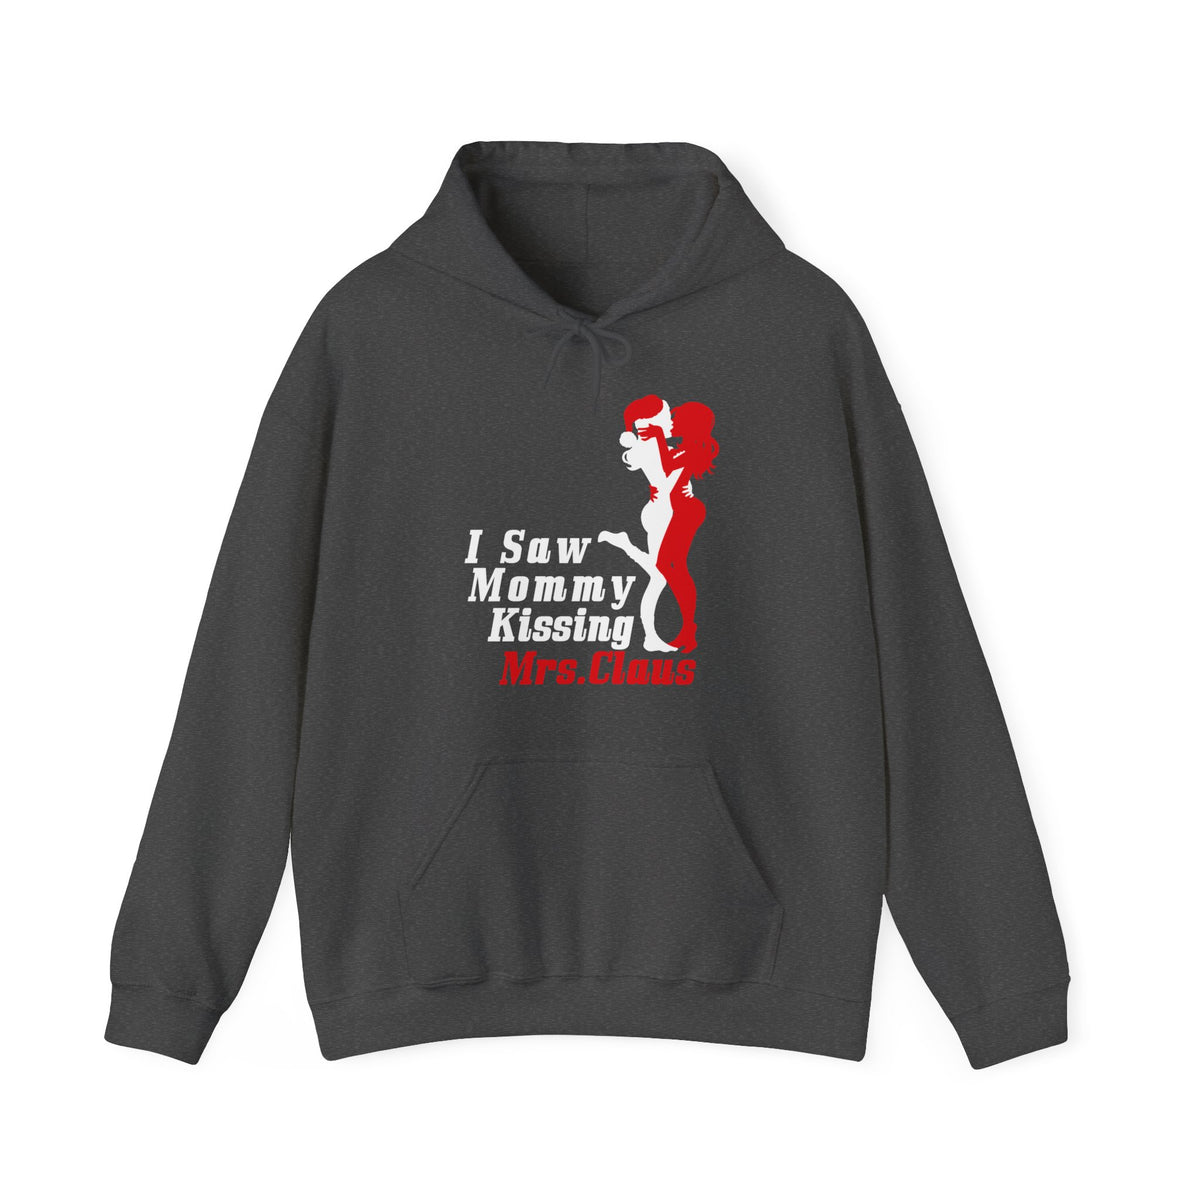 I Saw Mommy Kissing Mrs. Claus - Hoodie